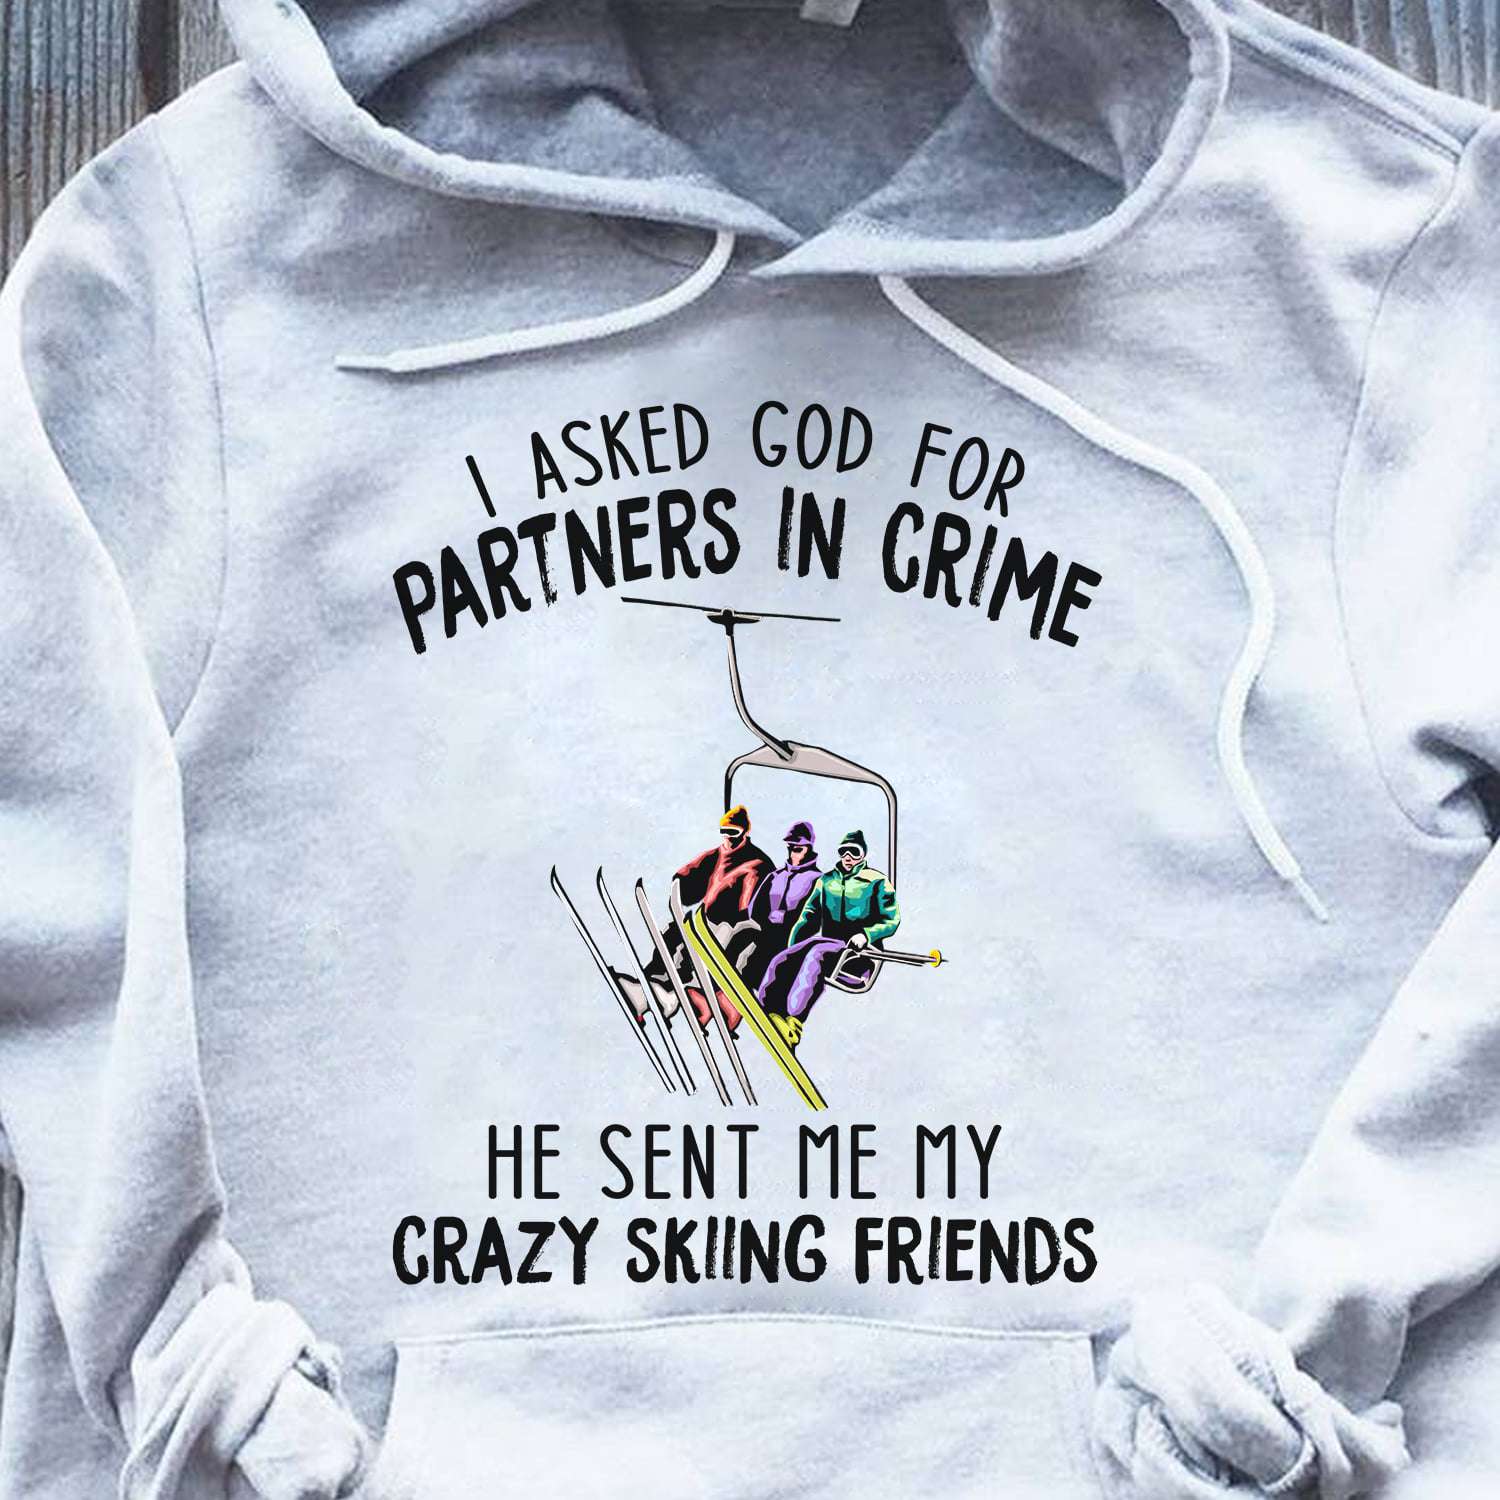 I asked god for partners in crime, he sent me my crazy skiing friends - Gift for skiers